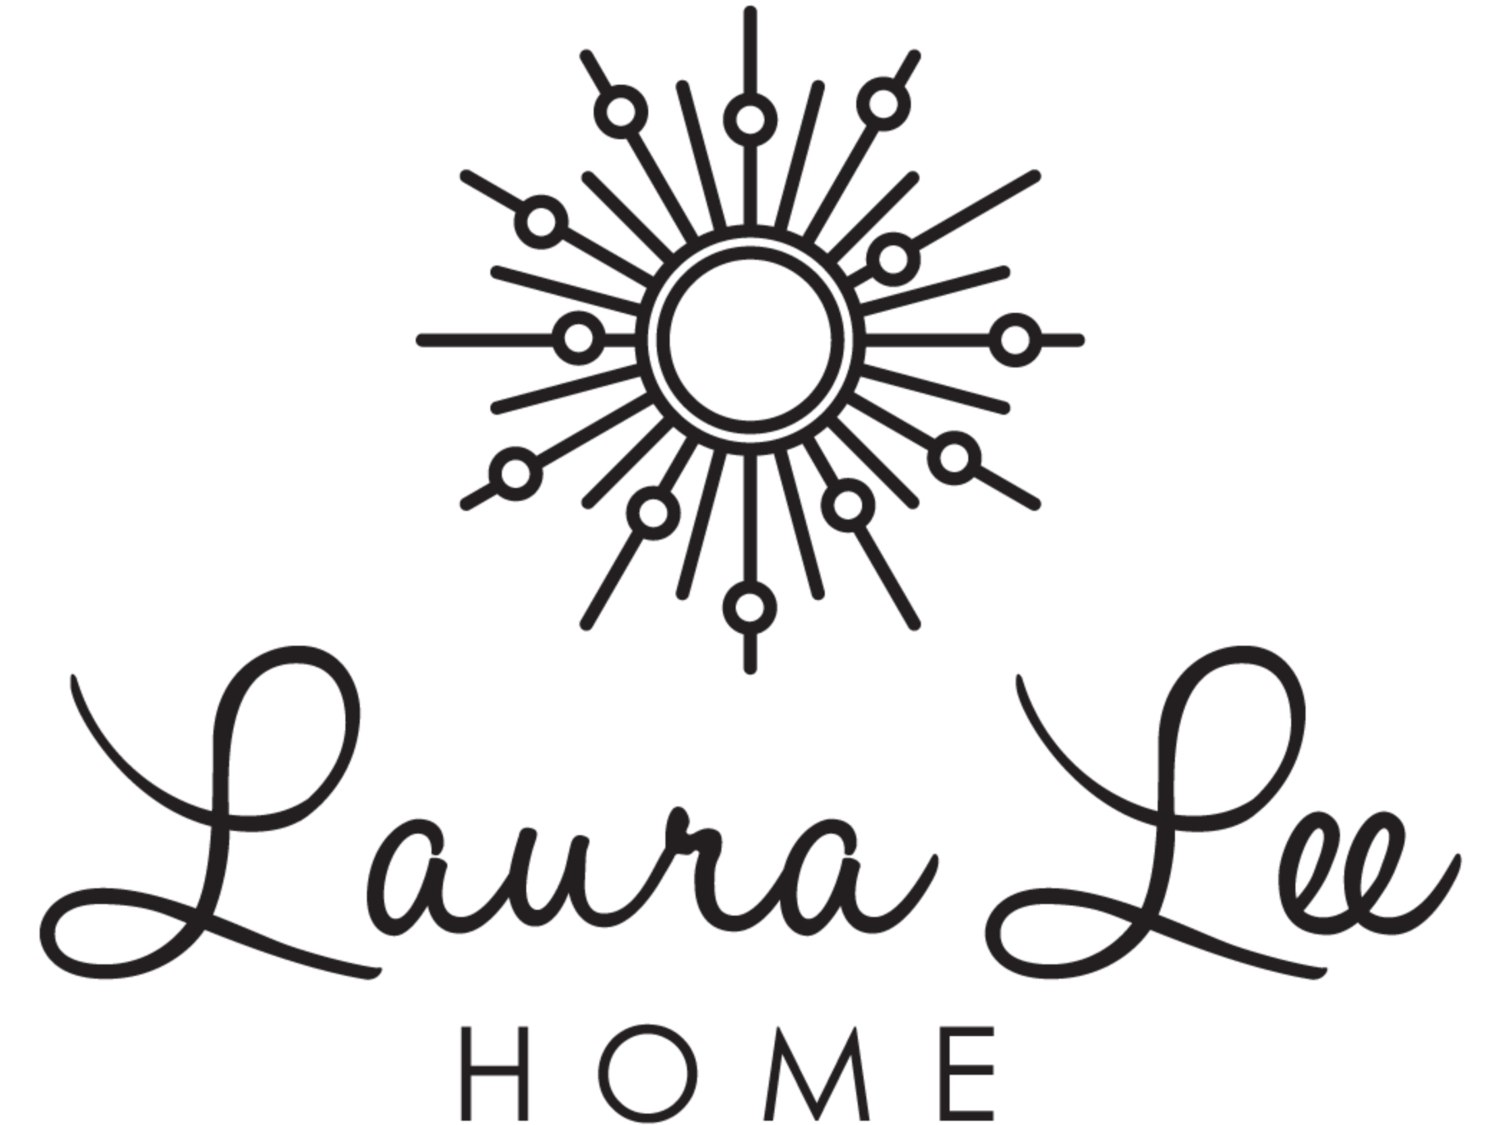 Laura Lee Home